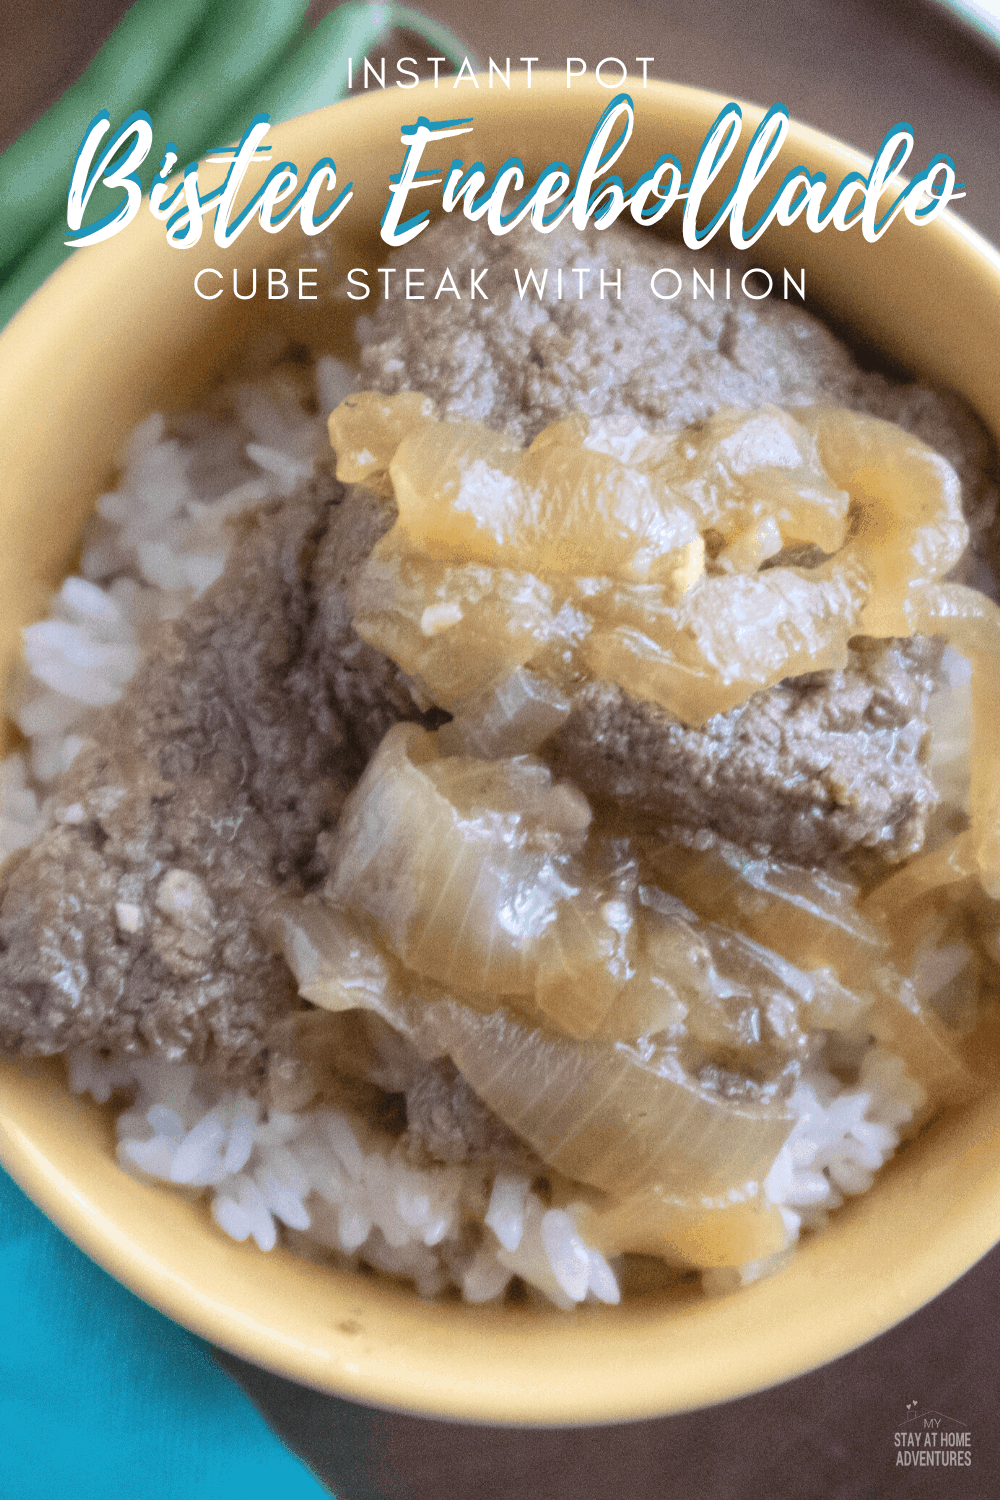 Learn how to create this delicious Puerto Rican Bistec Encebollado (Cube Steak with Onion) using an Instant Pot. #instantpot #puertoricanfood #biste via @mystayathome